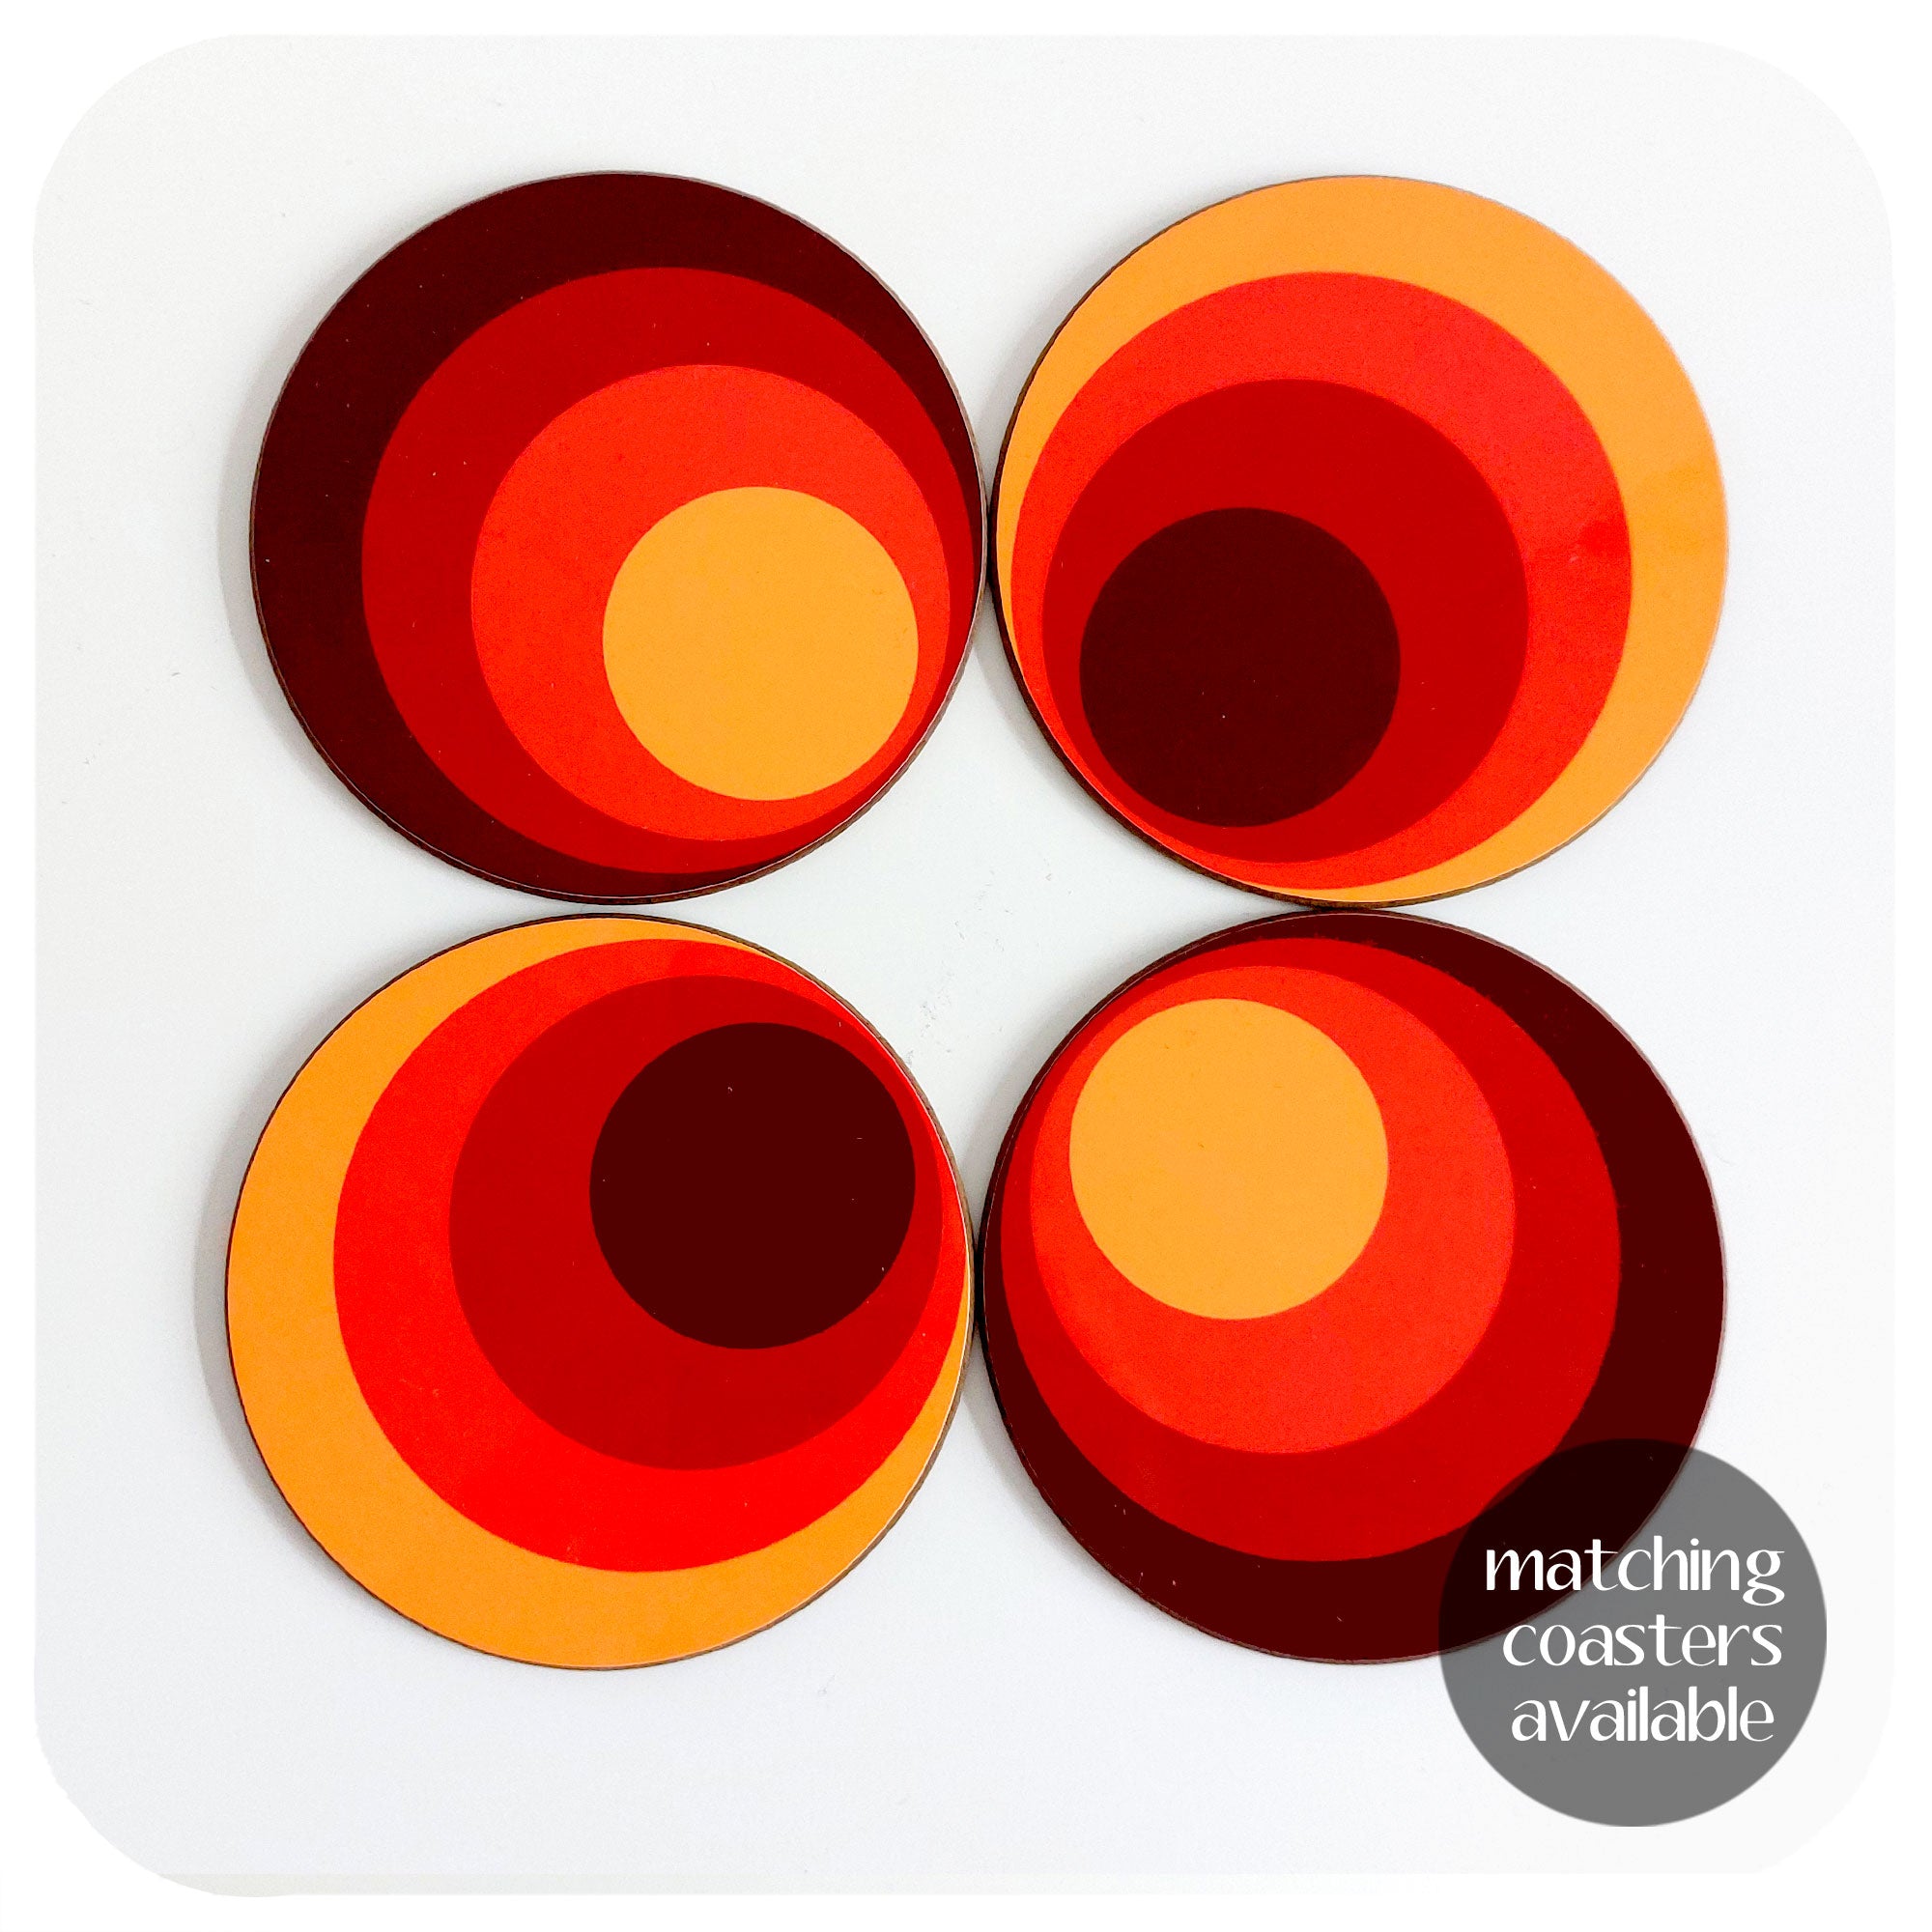 Four 70s Style coasters lie on a white background. Text in image reads "matching coasters available | The Inkabilly Emporium